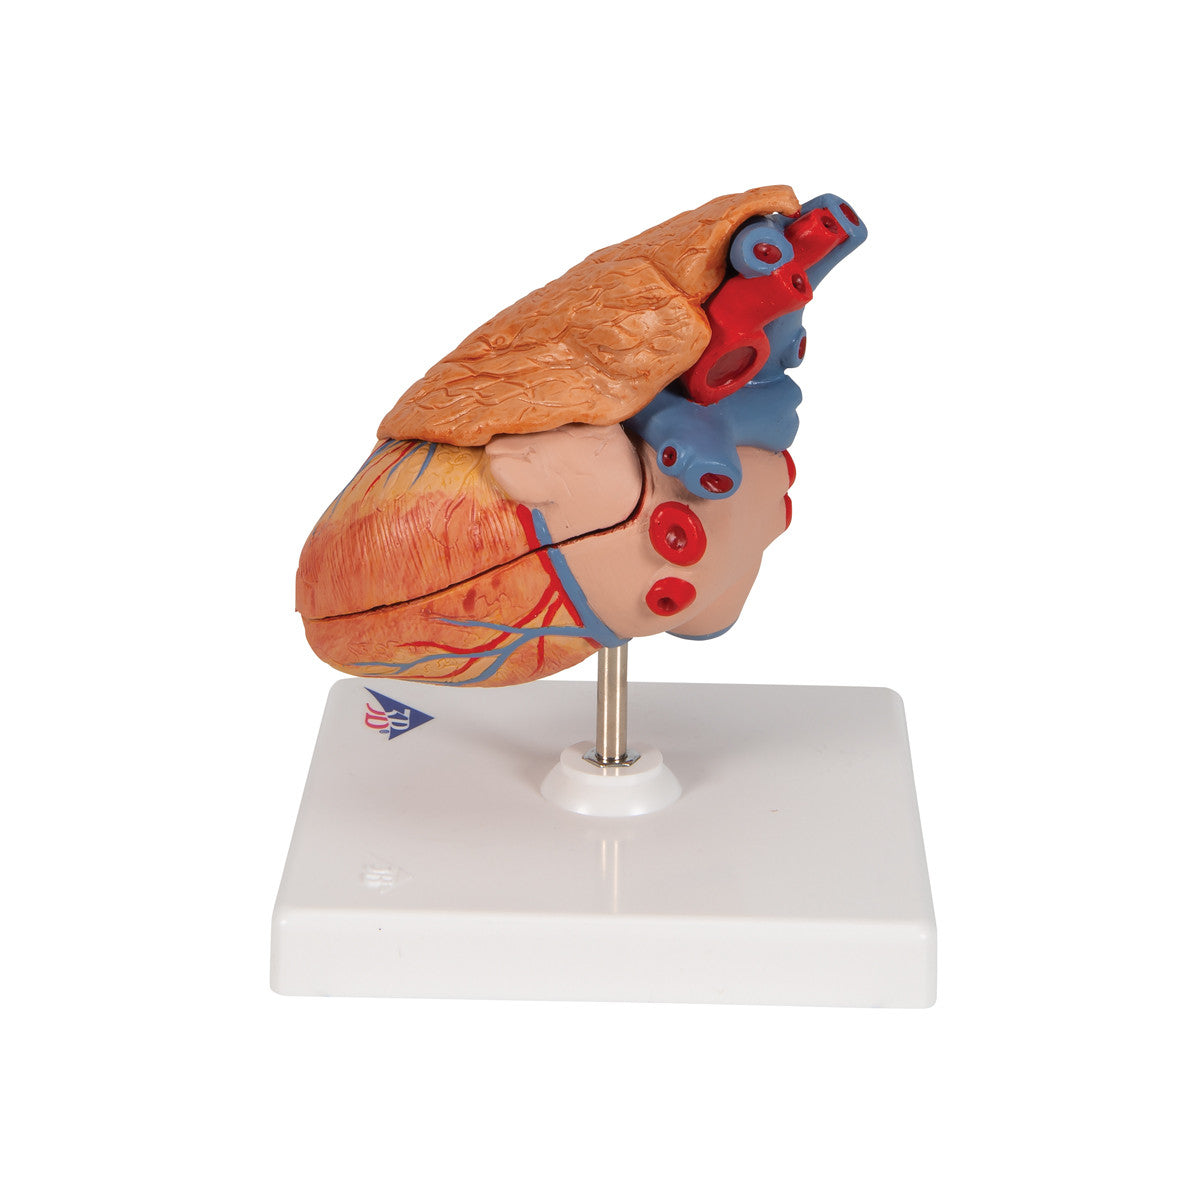 Heart Model with Thymus, 3 parts | 3B Scientific G08/1